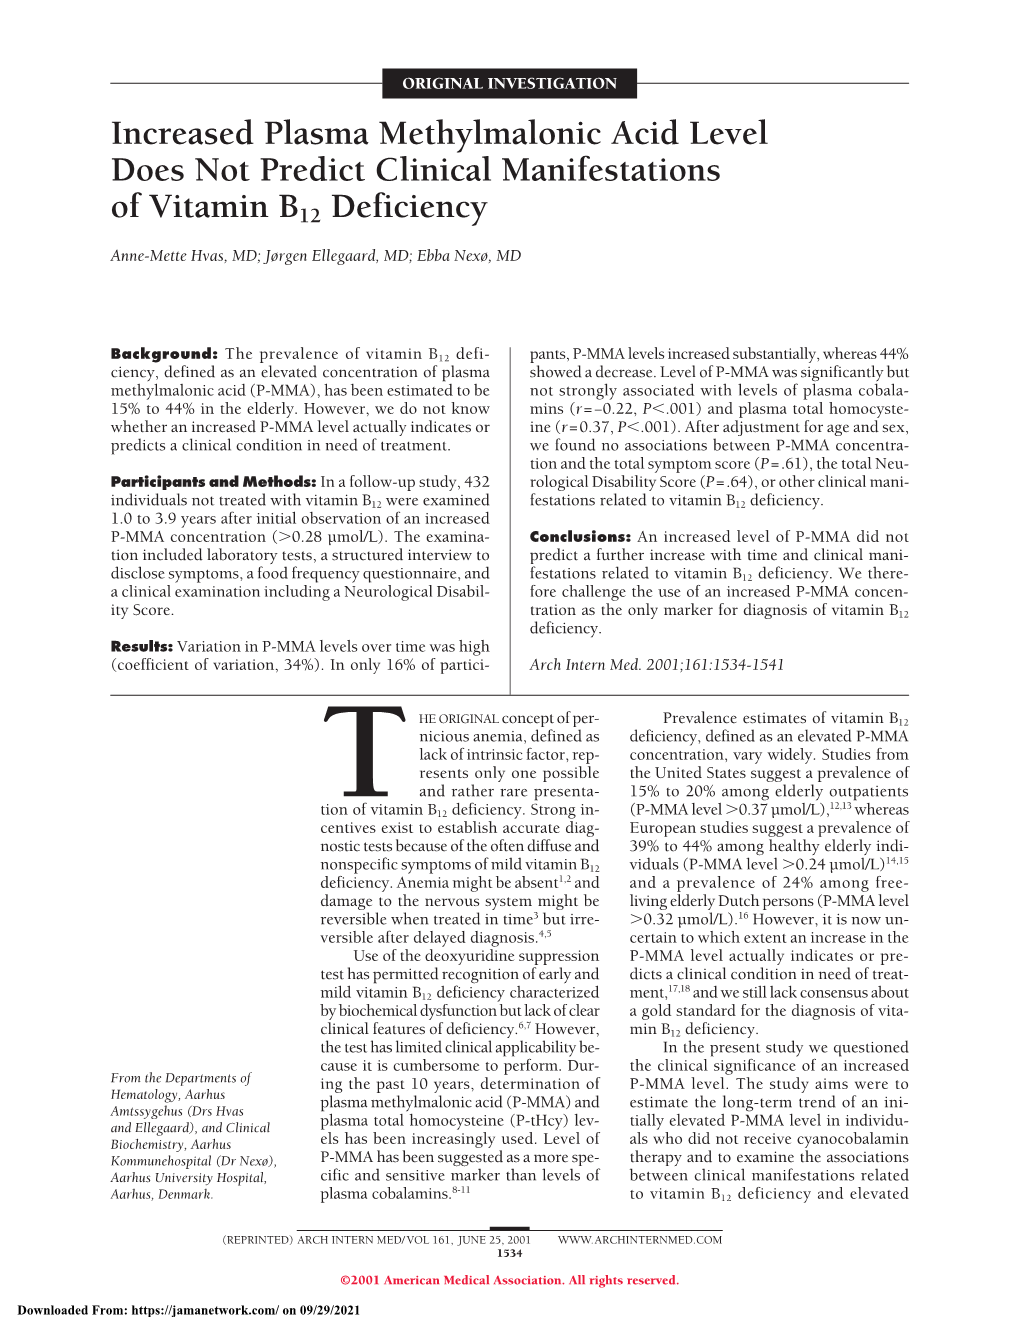 Increased Plasma Methylmalonic Acid Level Does Not Predict Clinical Manifestations of Vitamin B12 Deficiency